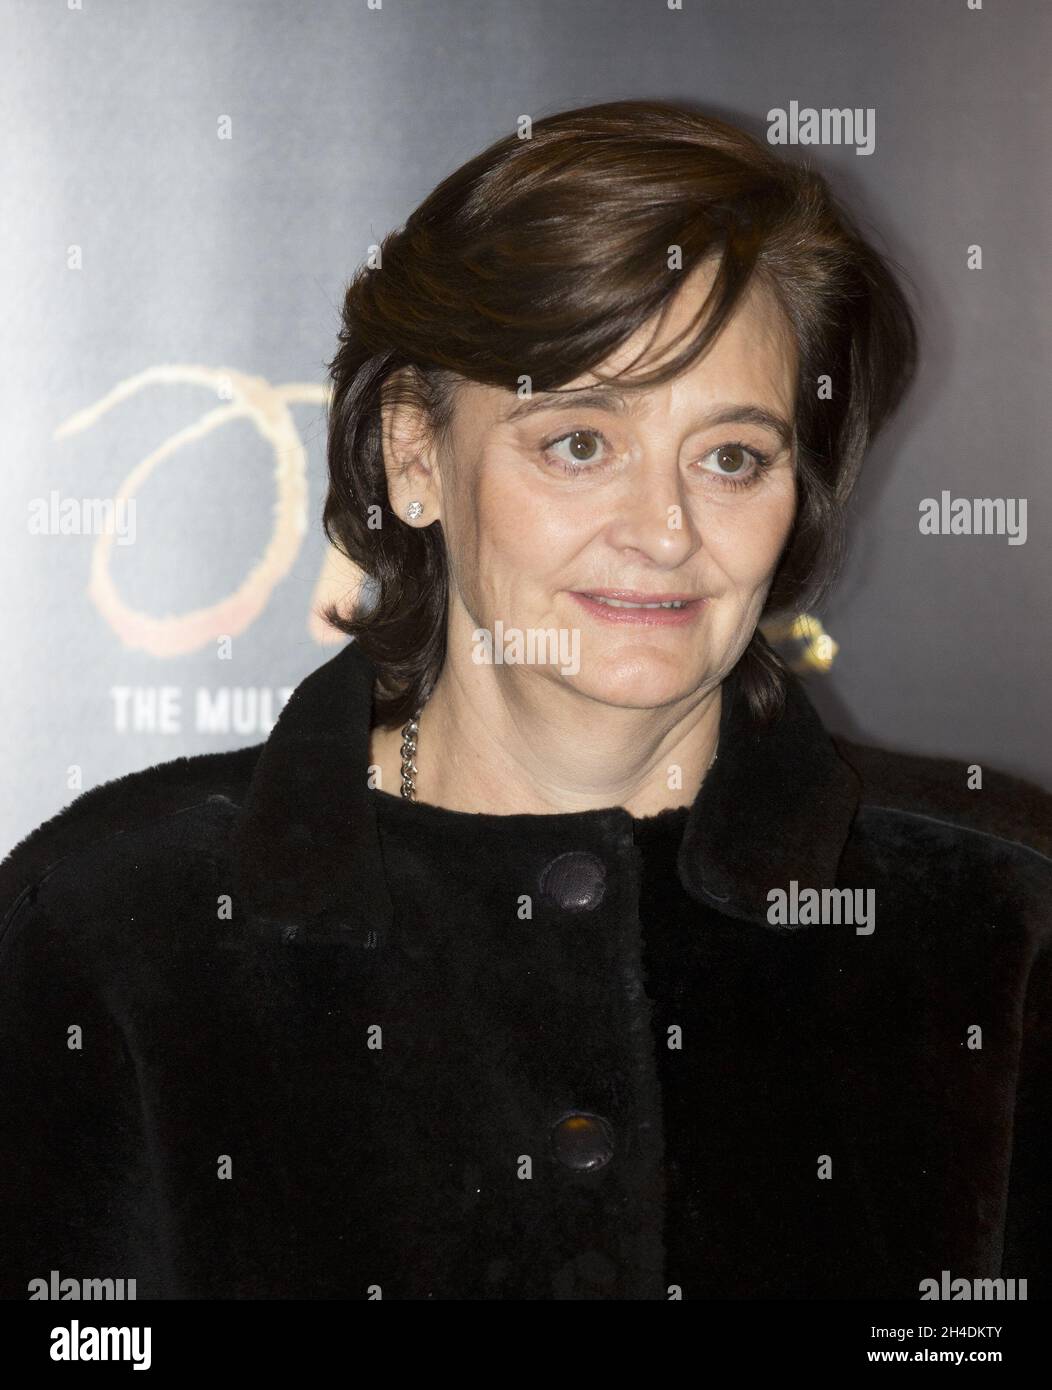 British barrister and former British Prime Minister Tony Blair's wife Cherie Blair, CBE, QC attends the opening night of Ronan Keating joining the cast of Once the musical Stock Photo